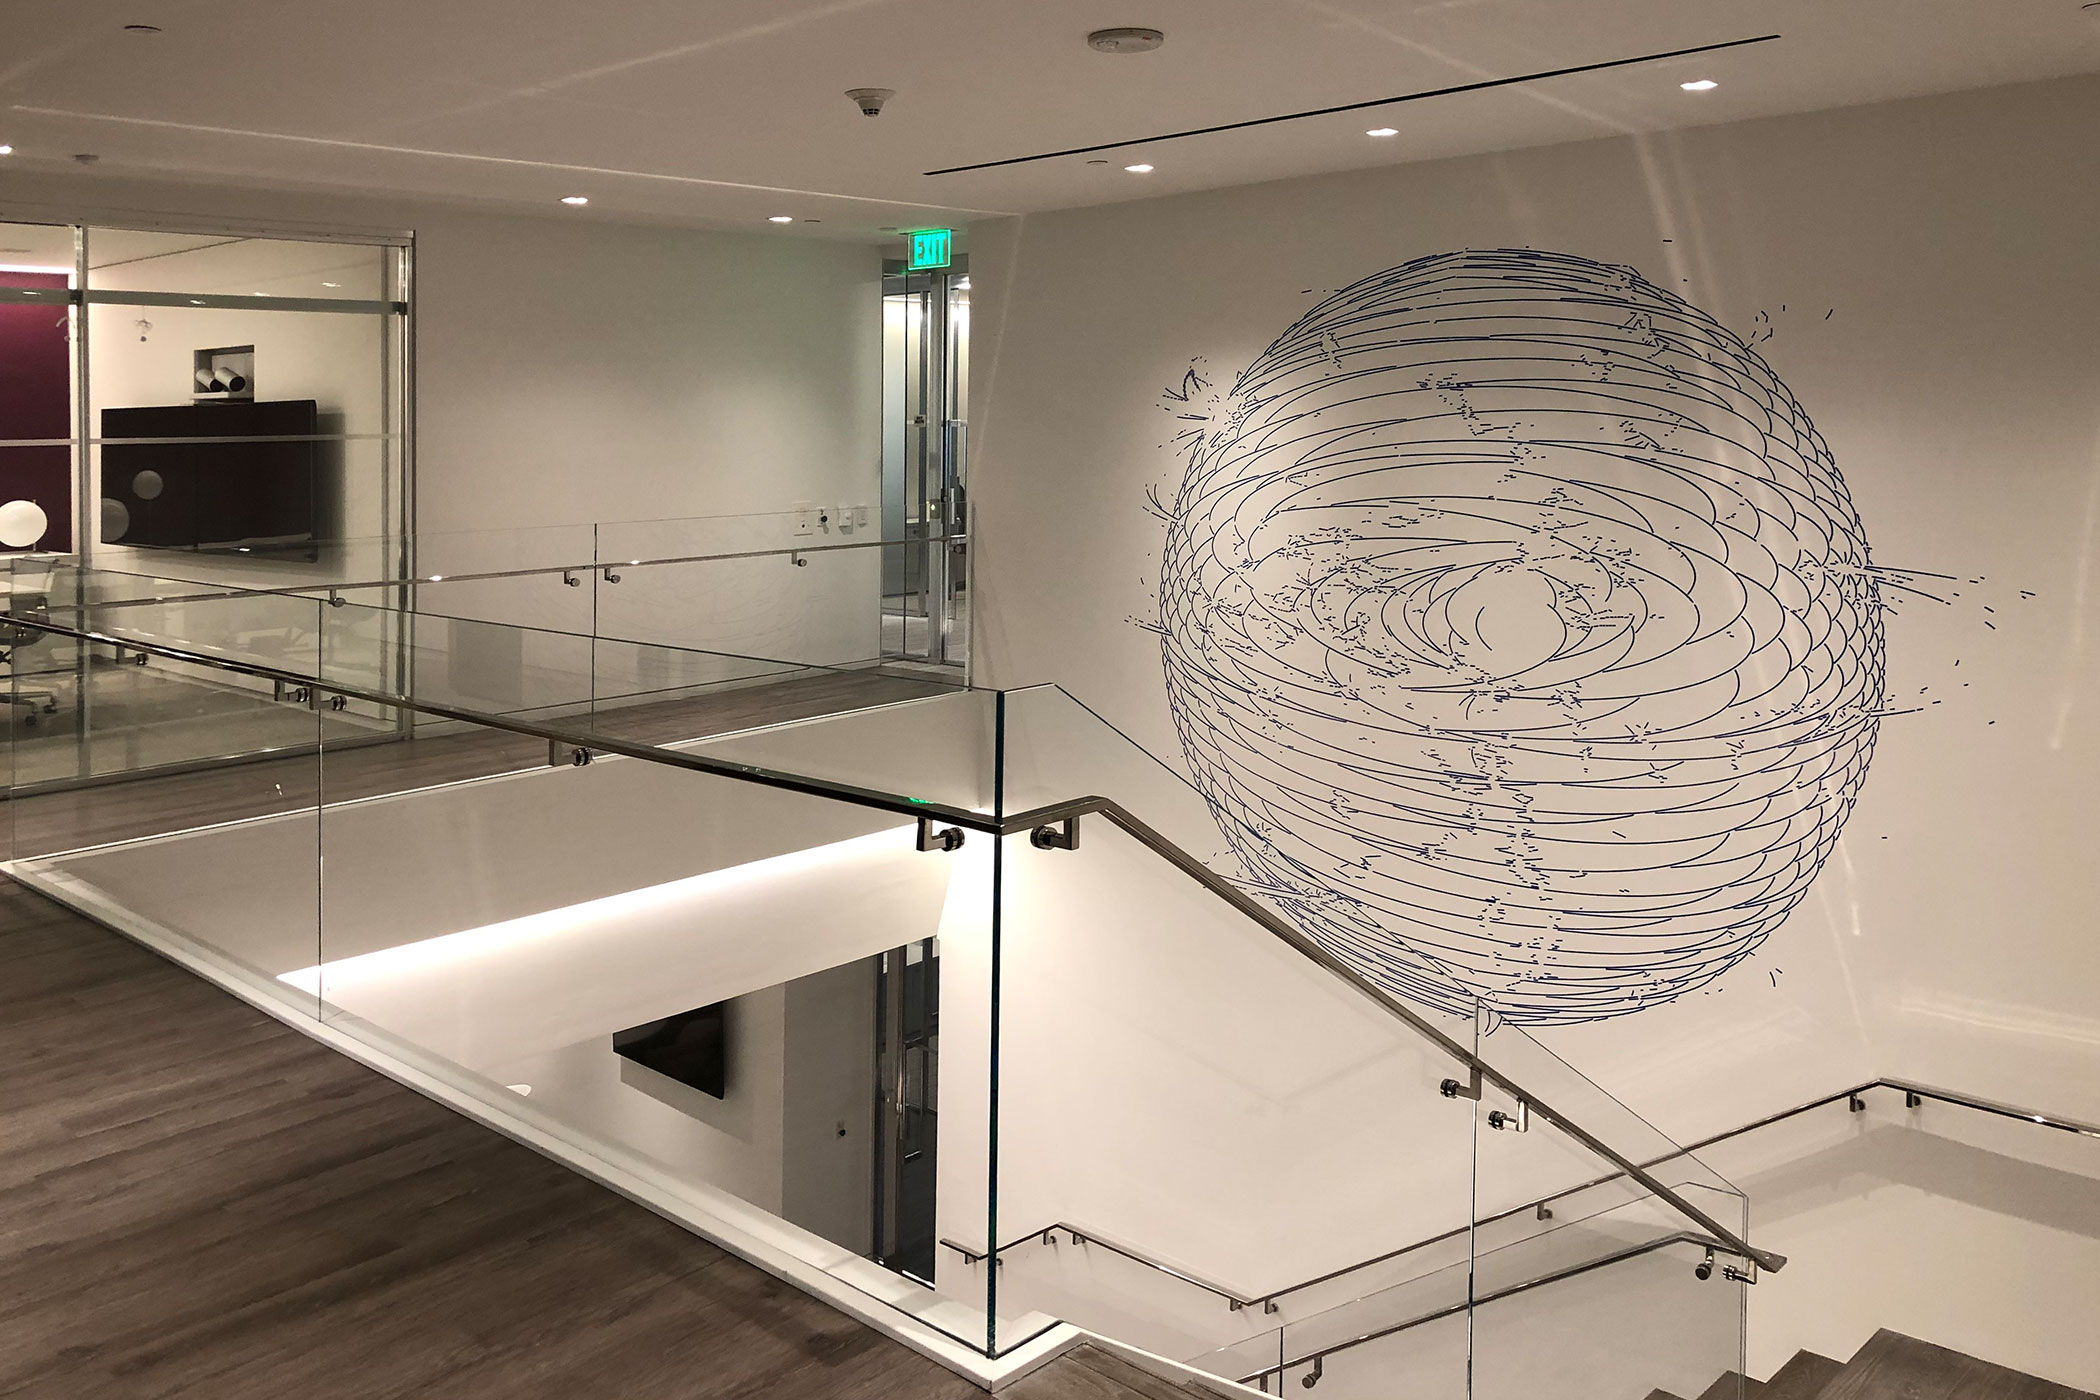 #15 ; Vinylfolienplot mit Haftbeschichtung auf Wand (Cut out of adhesive backed vinyl on wall); 2004 (installed 2019); 334 x 408 cm 10'12" x 13'7"); LSM Architects; Global Law Firm, Los Angeles, USA